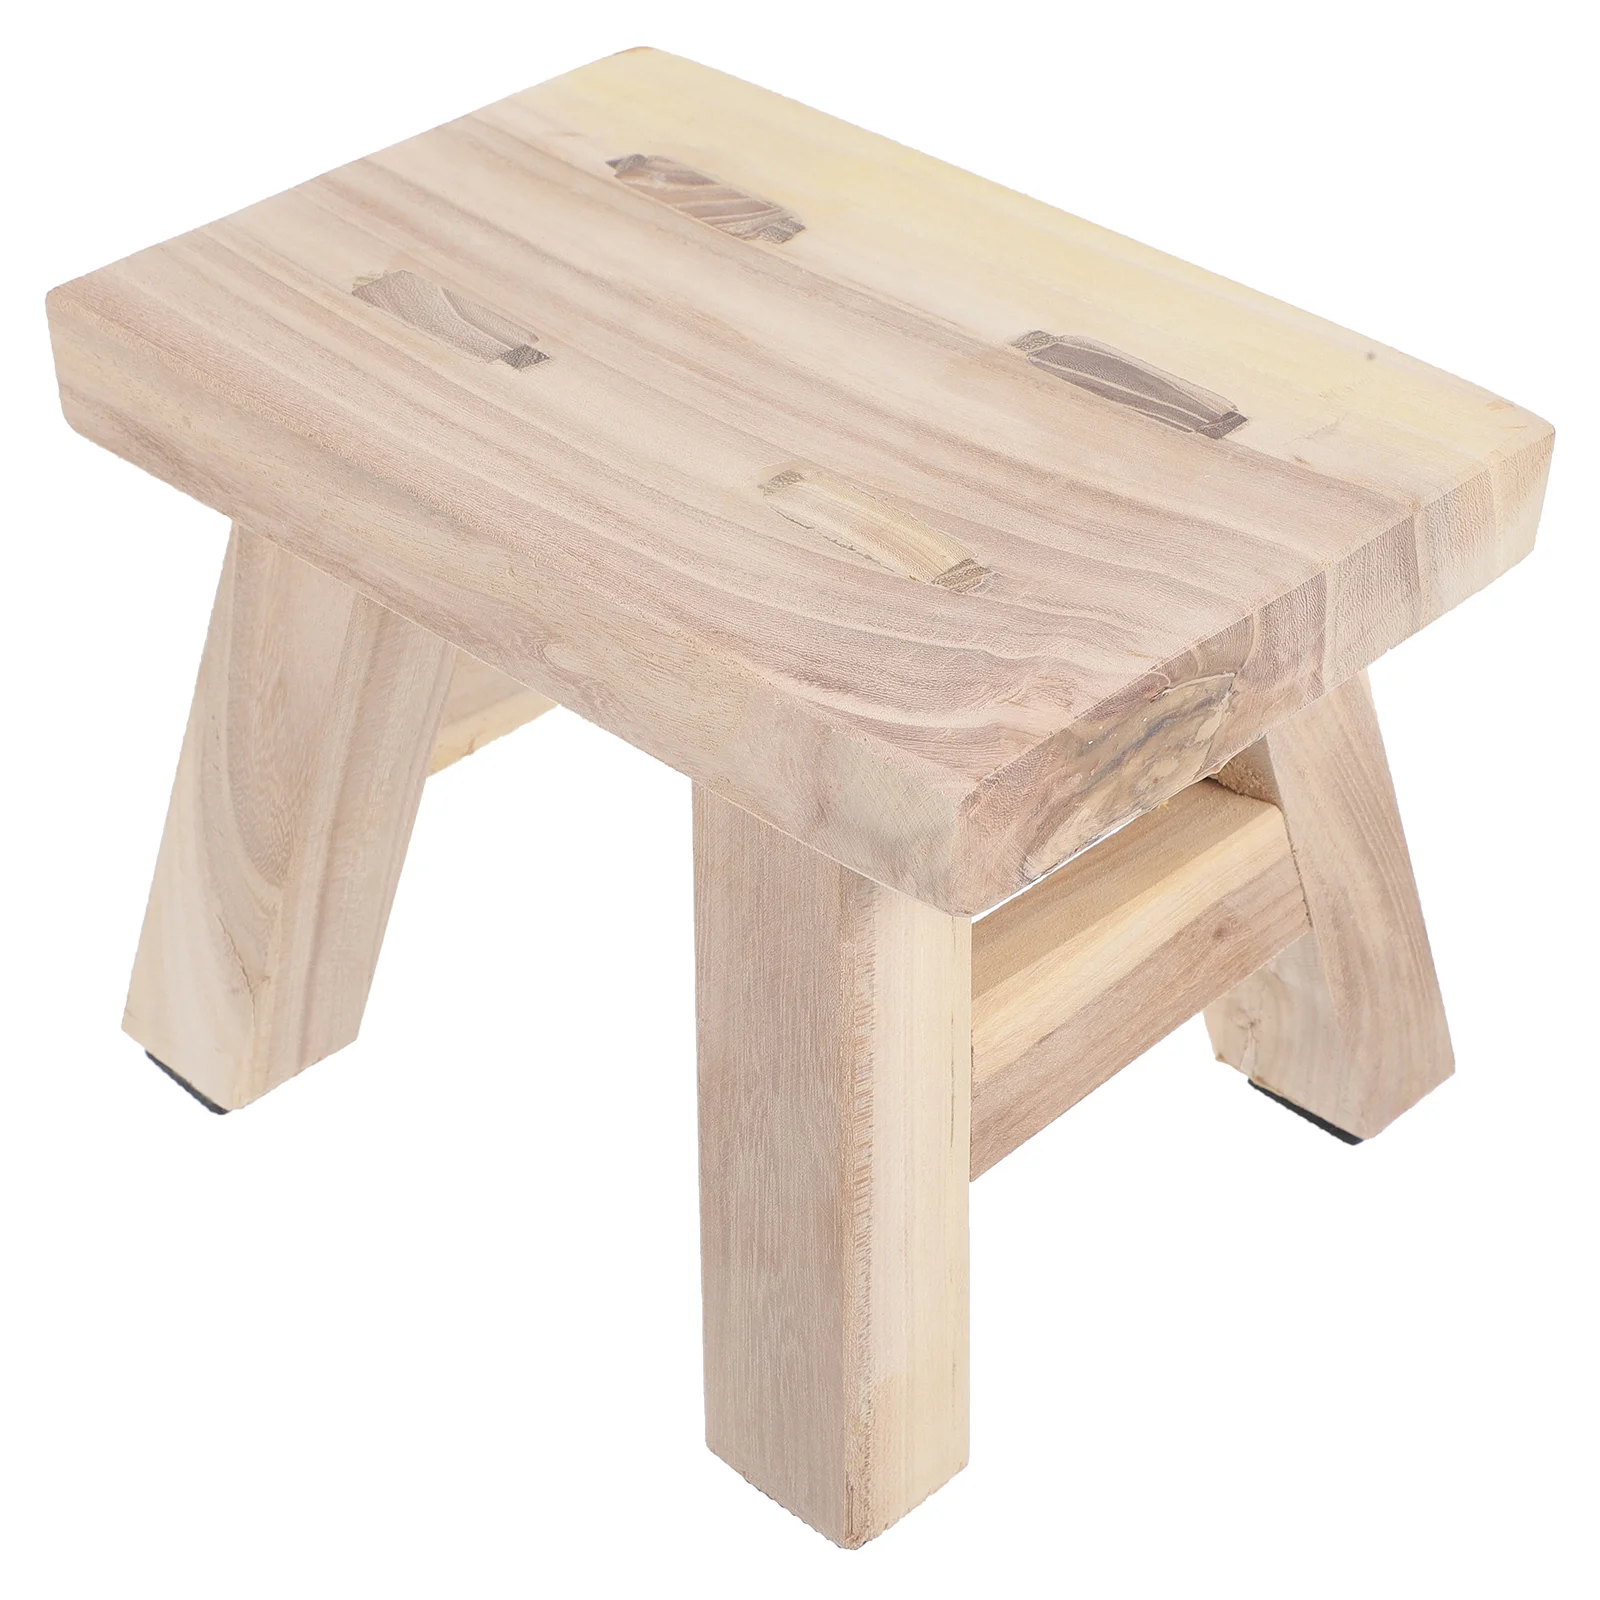 

Solid Wood Bench Kids Stools for Sitting Chinese Style Step Toddler Wooden Small